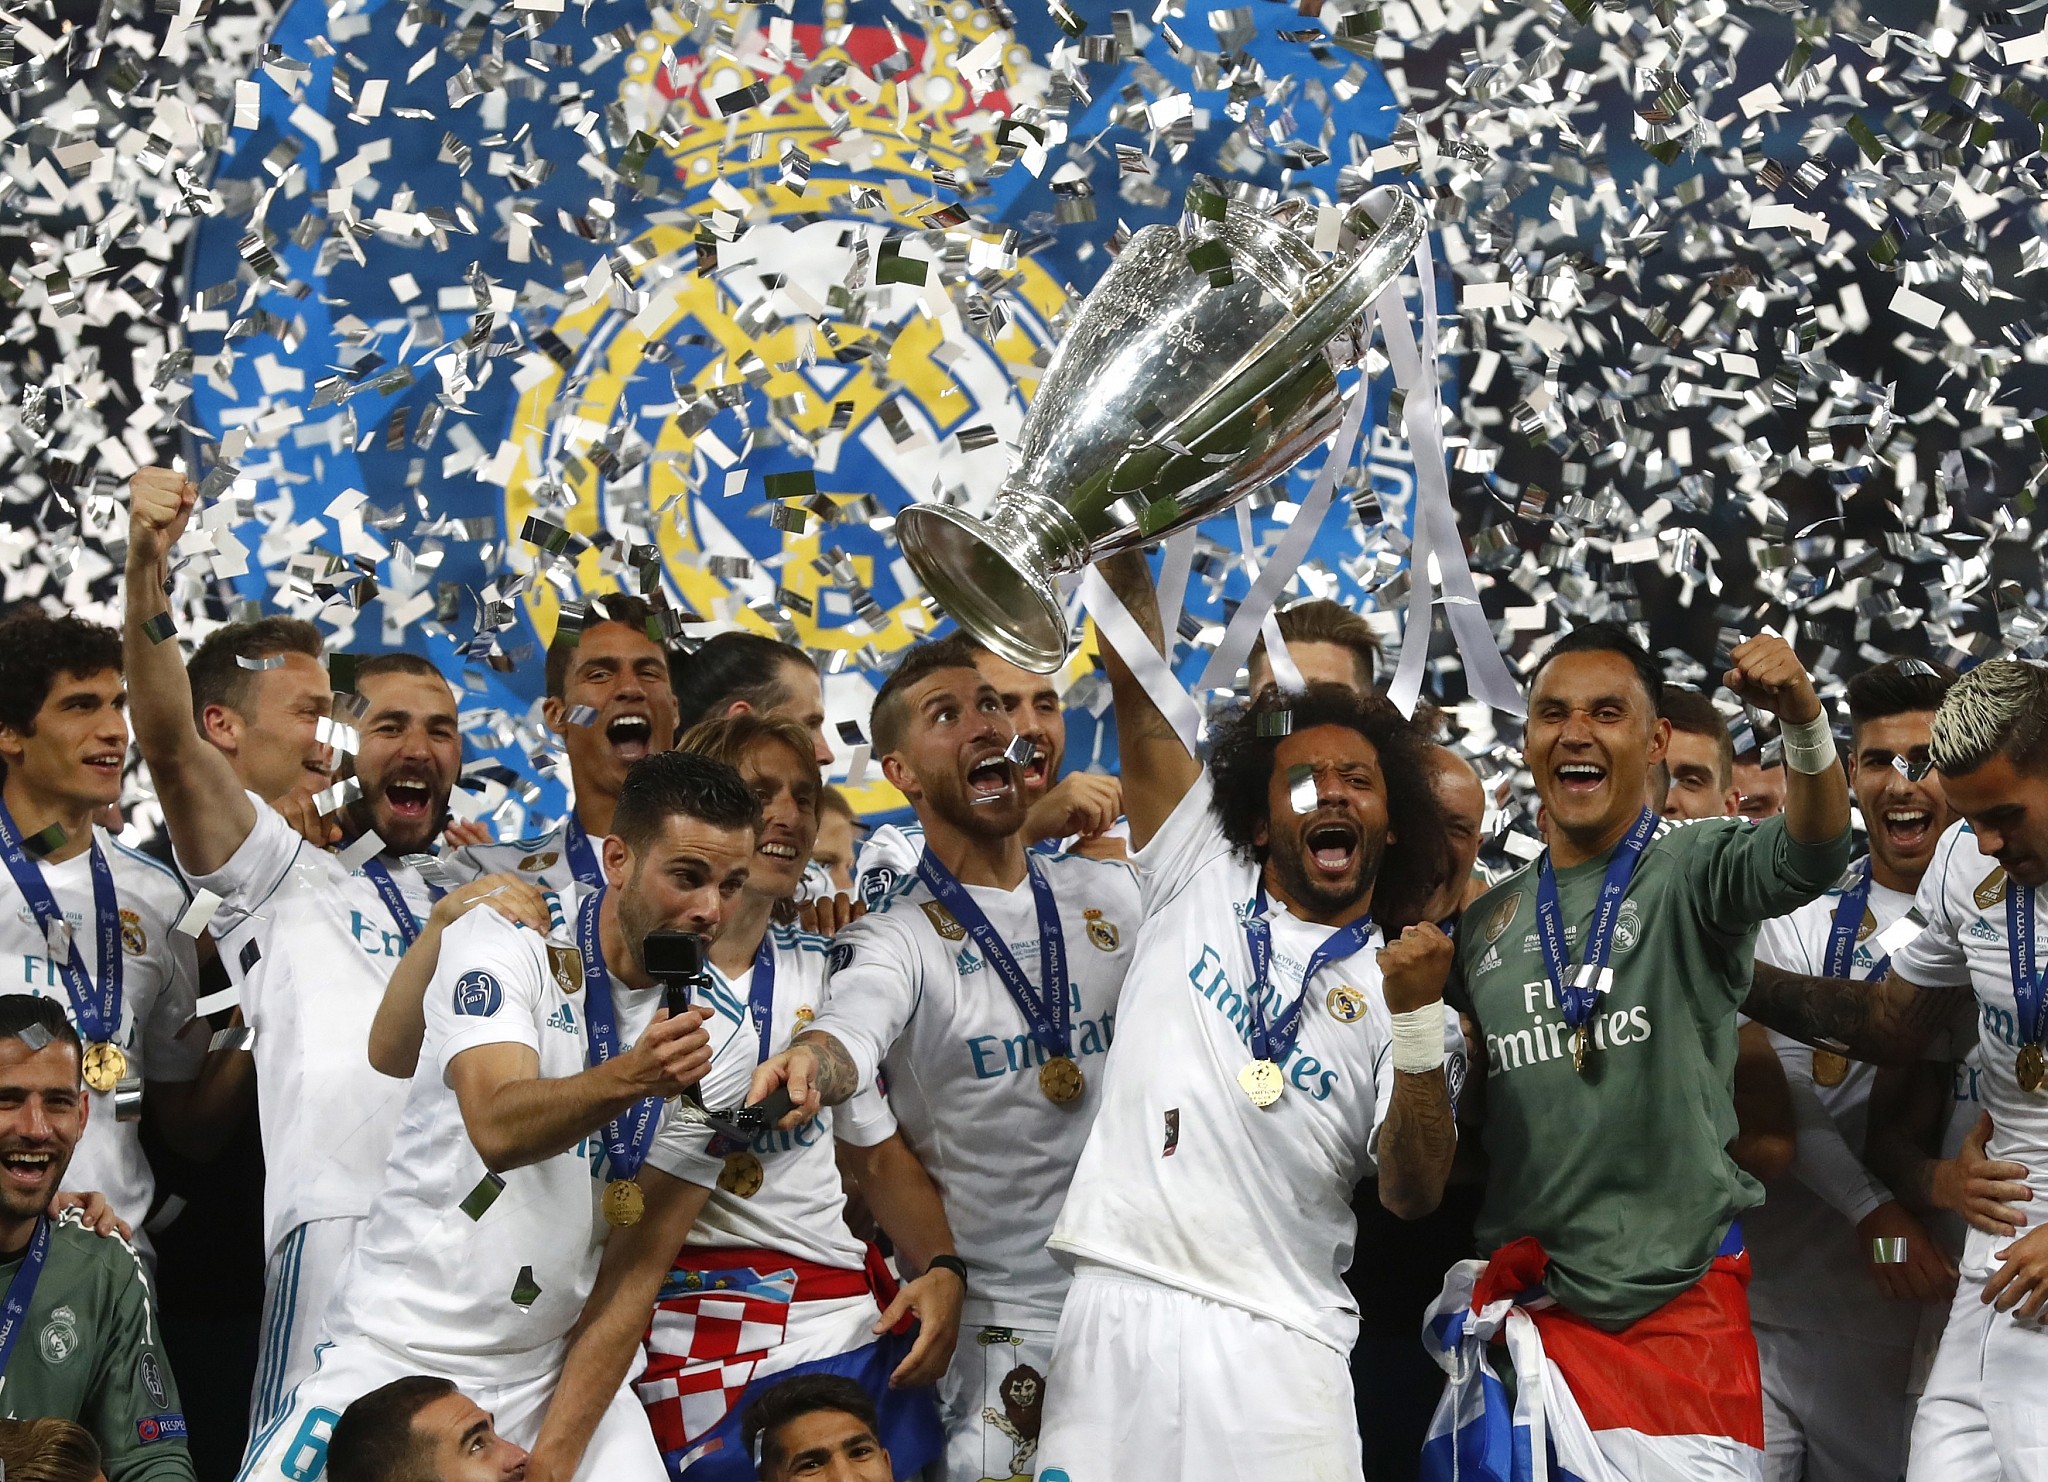 Bale S Scissor Kick Gives Madrid 3rd Straight European Soccer Title The Times Of Israel